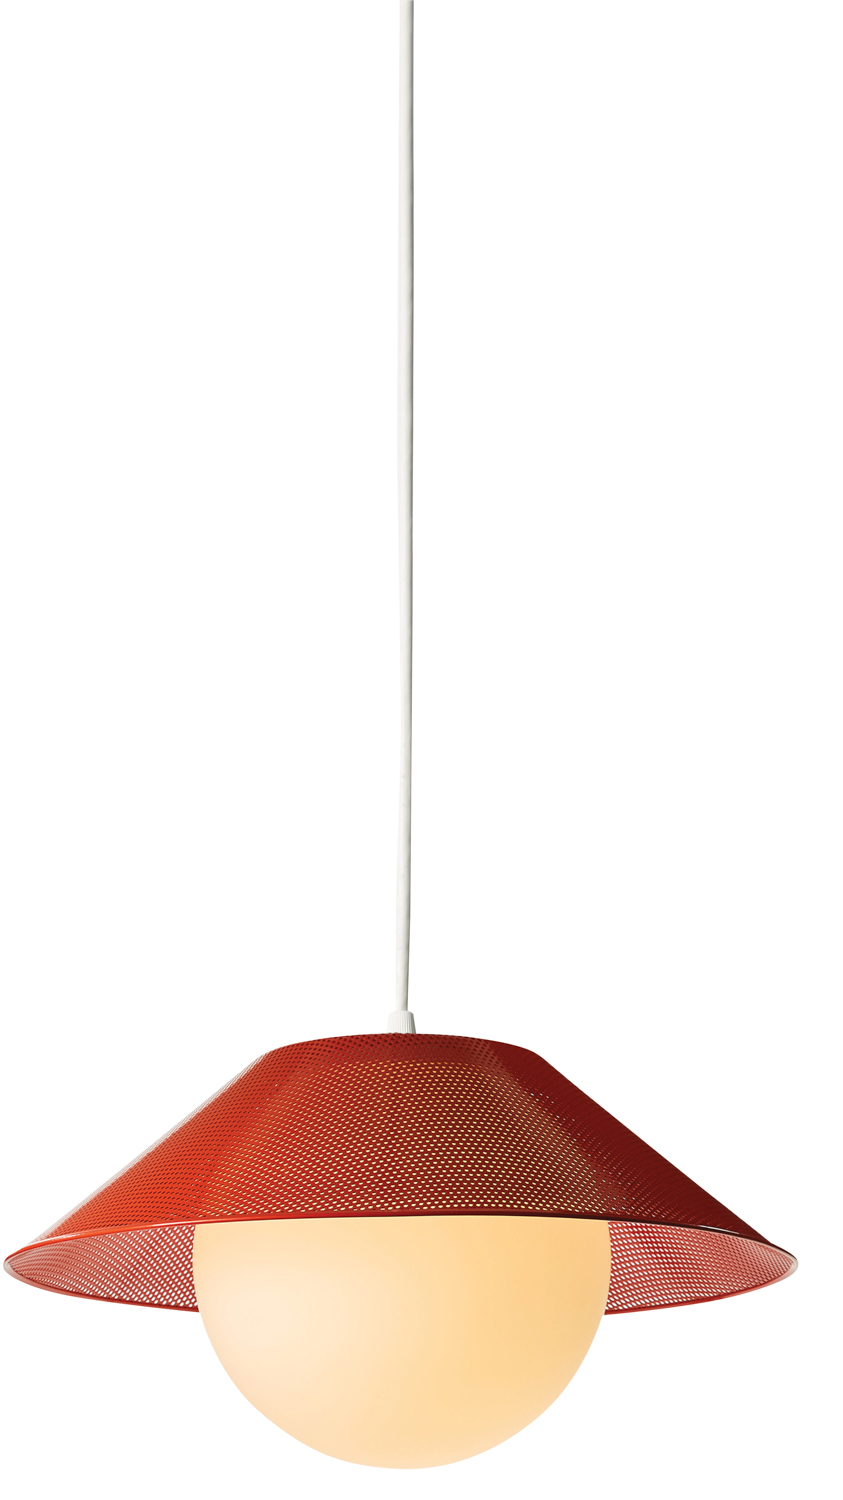 vermillion pendant lamp with round orb bulb